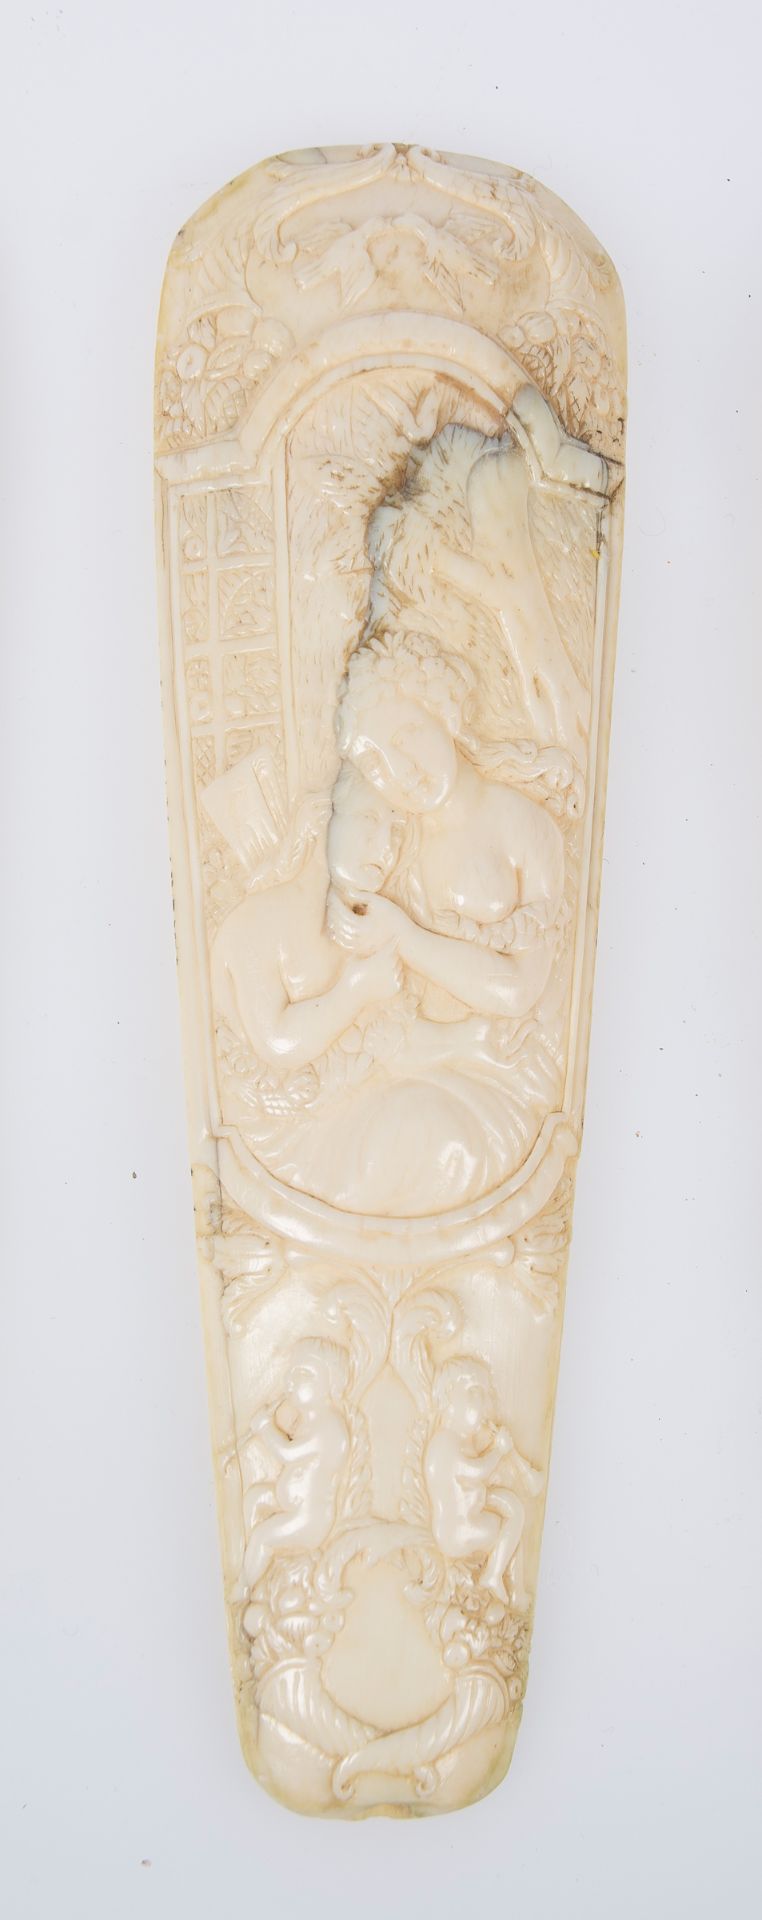 Sculpted ivory snuffbox. The Netherlands. Circa 1720.